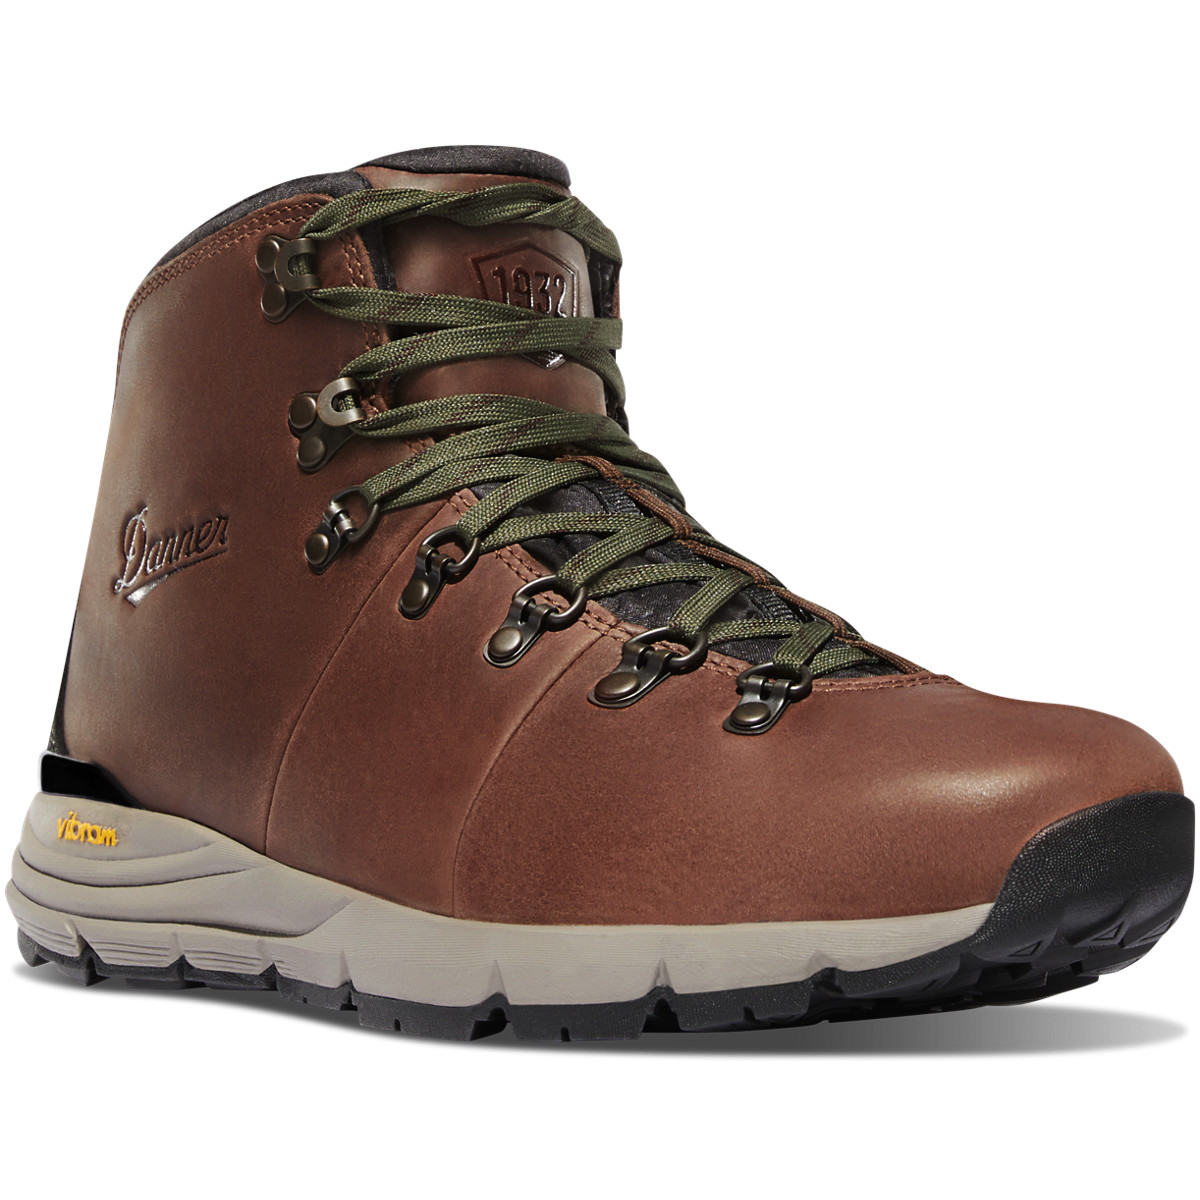 Danner Mens Mountain 600 4.5 Hiking Boots Brown - HJF860374